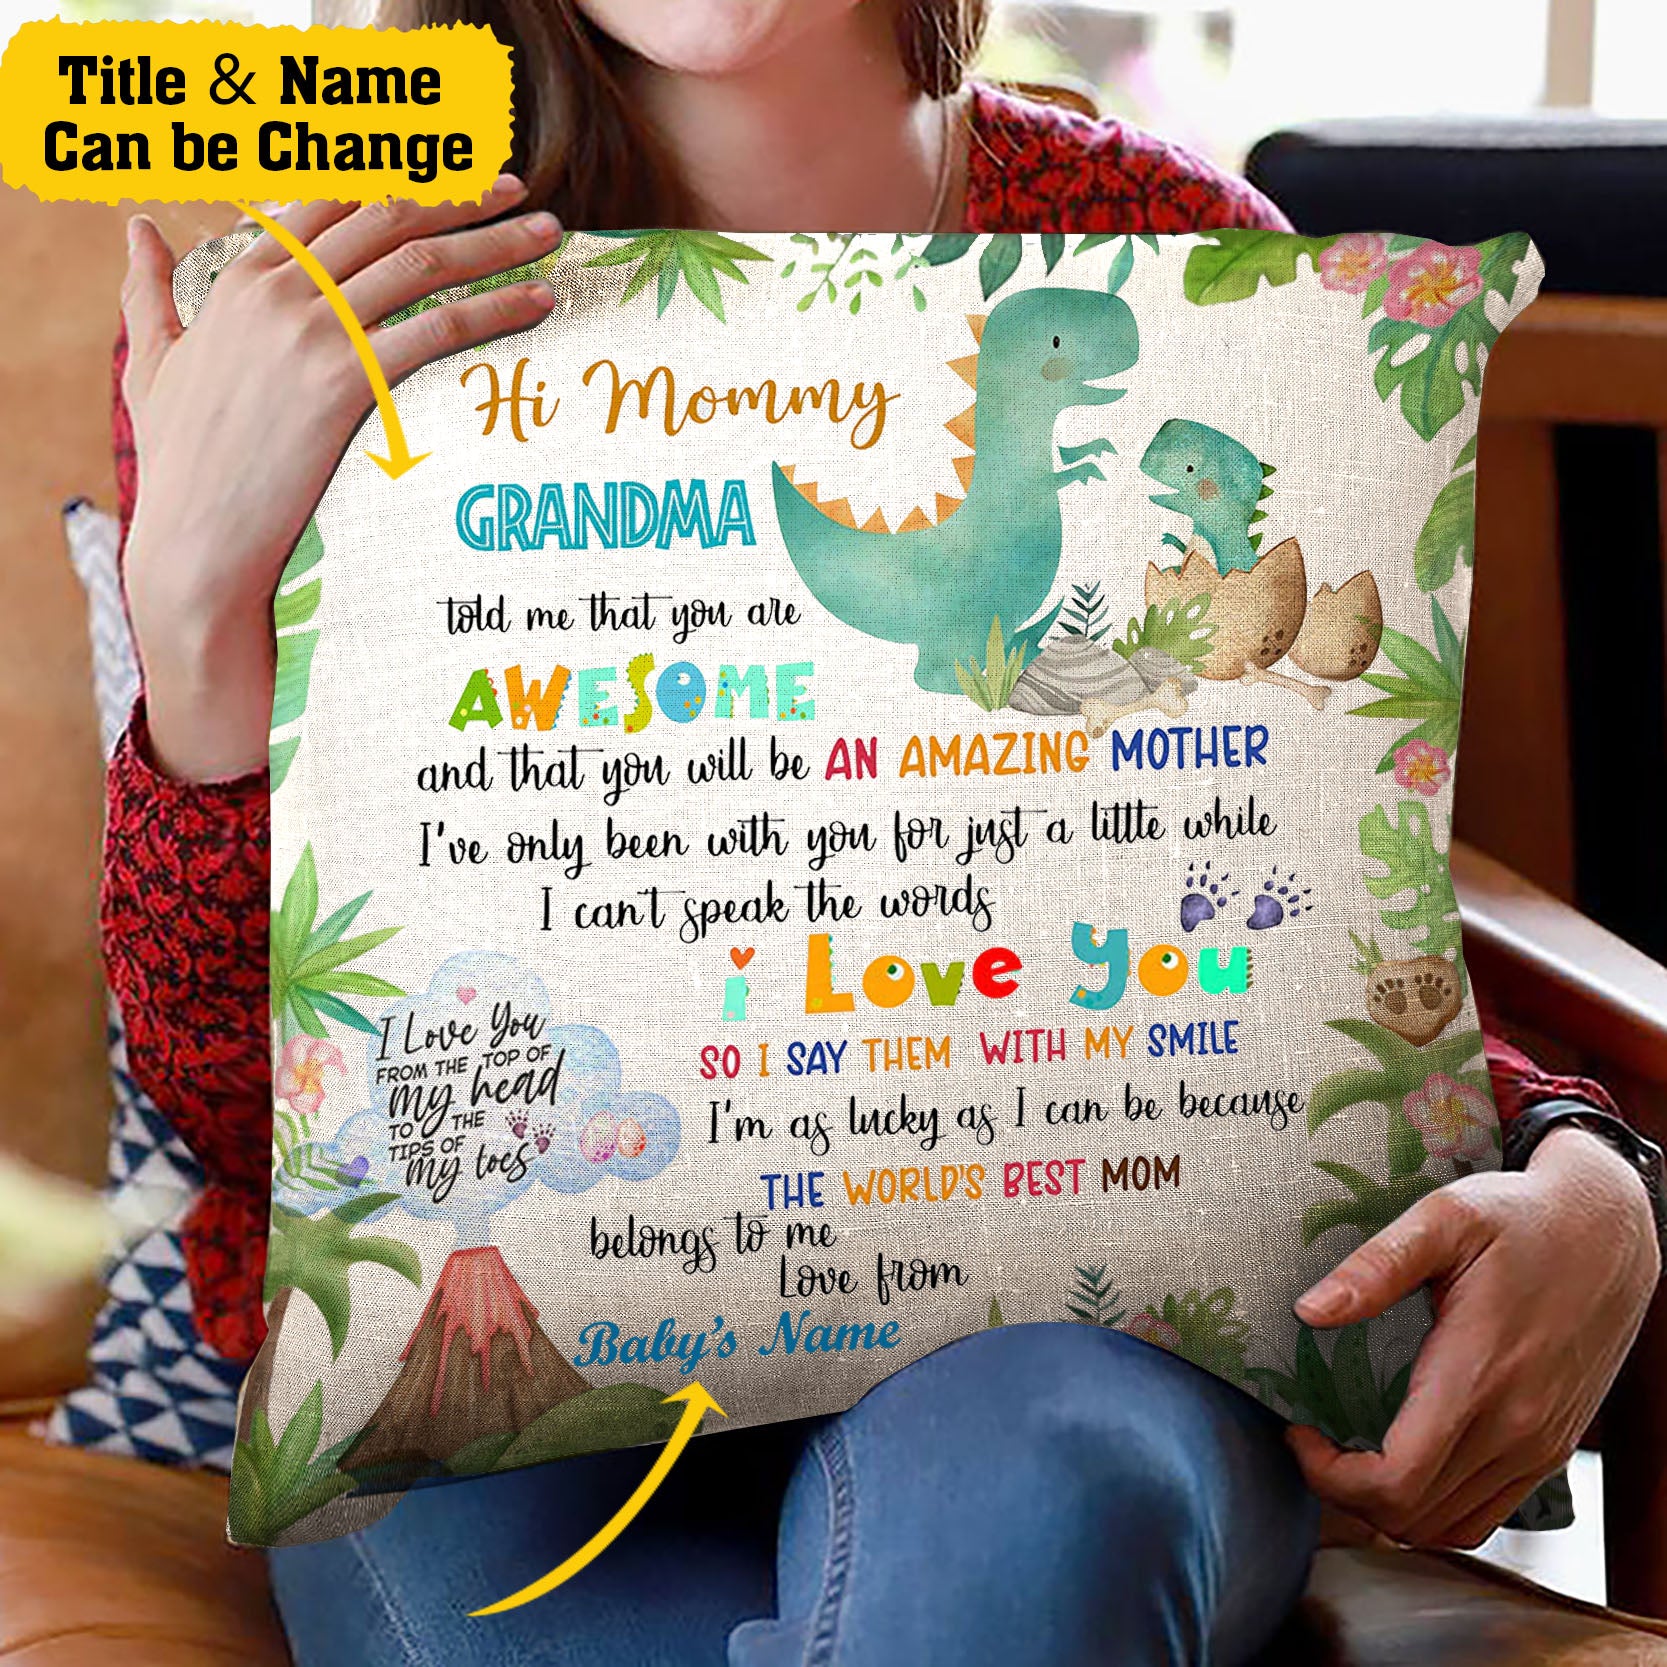 Personalized Hi Mommy Grandma Told Me That You Are Awesome Cute Dinosaur Custom Pillow